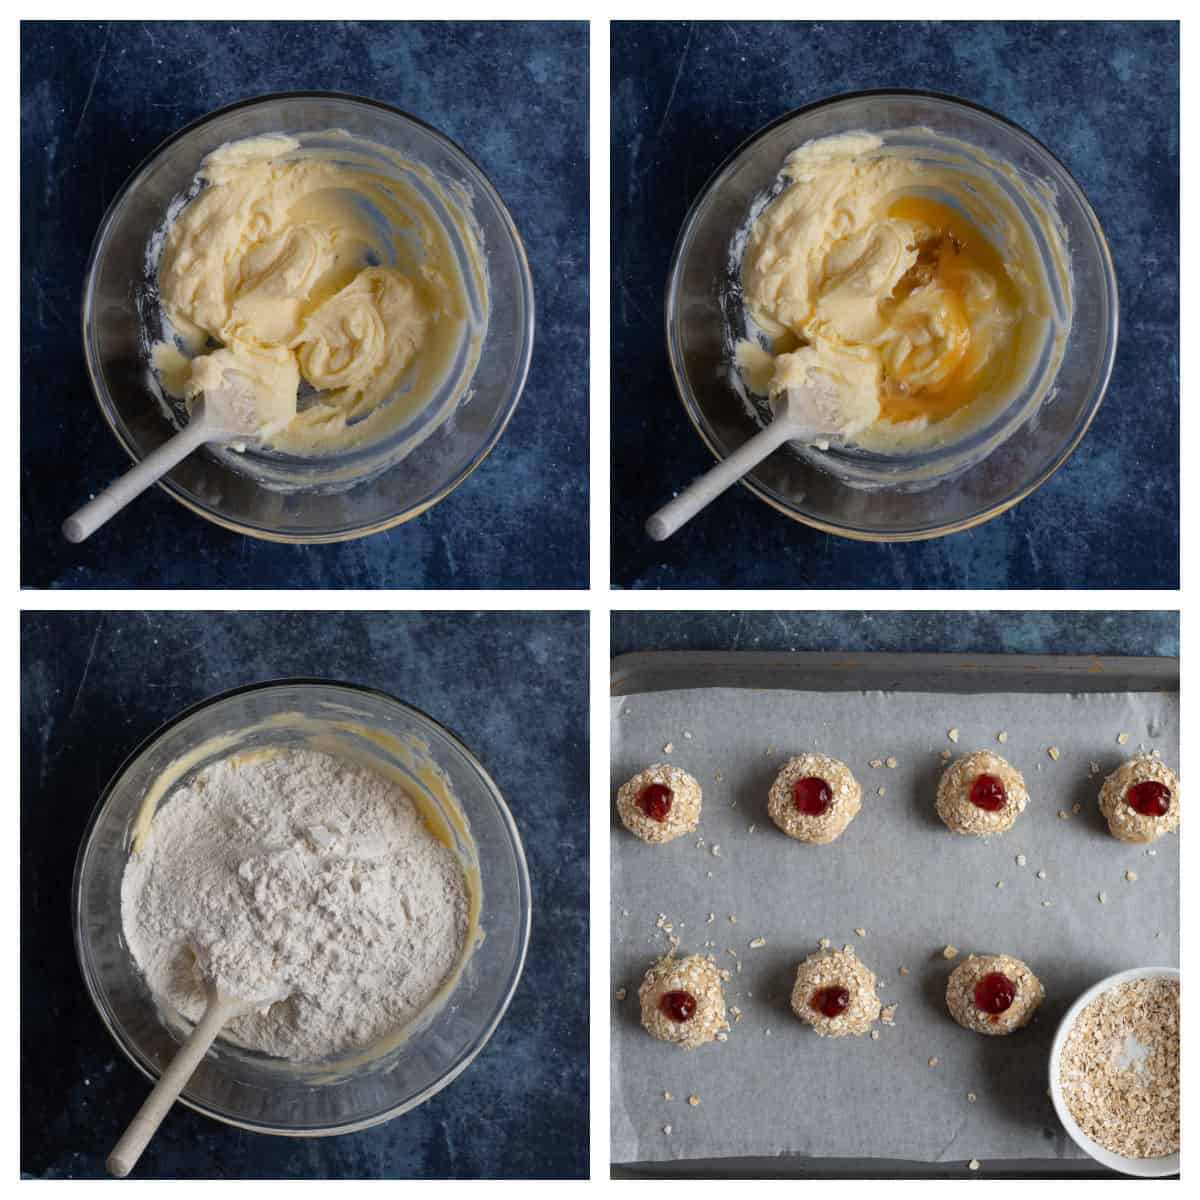 Step by step photo instructions for making melting moments biscuits.